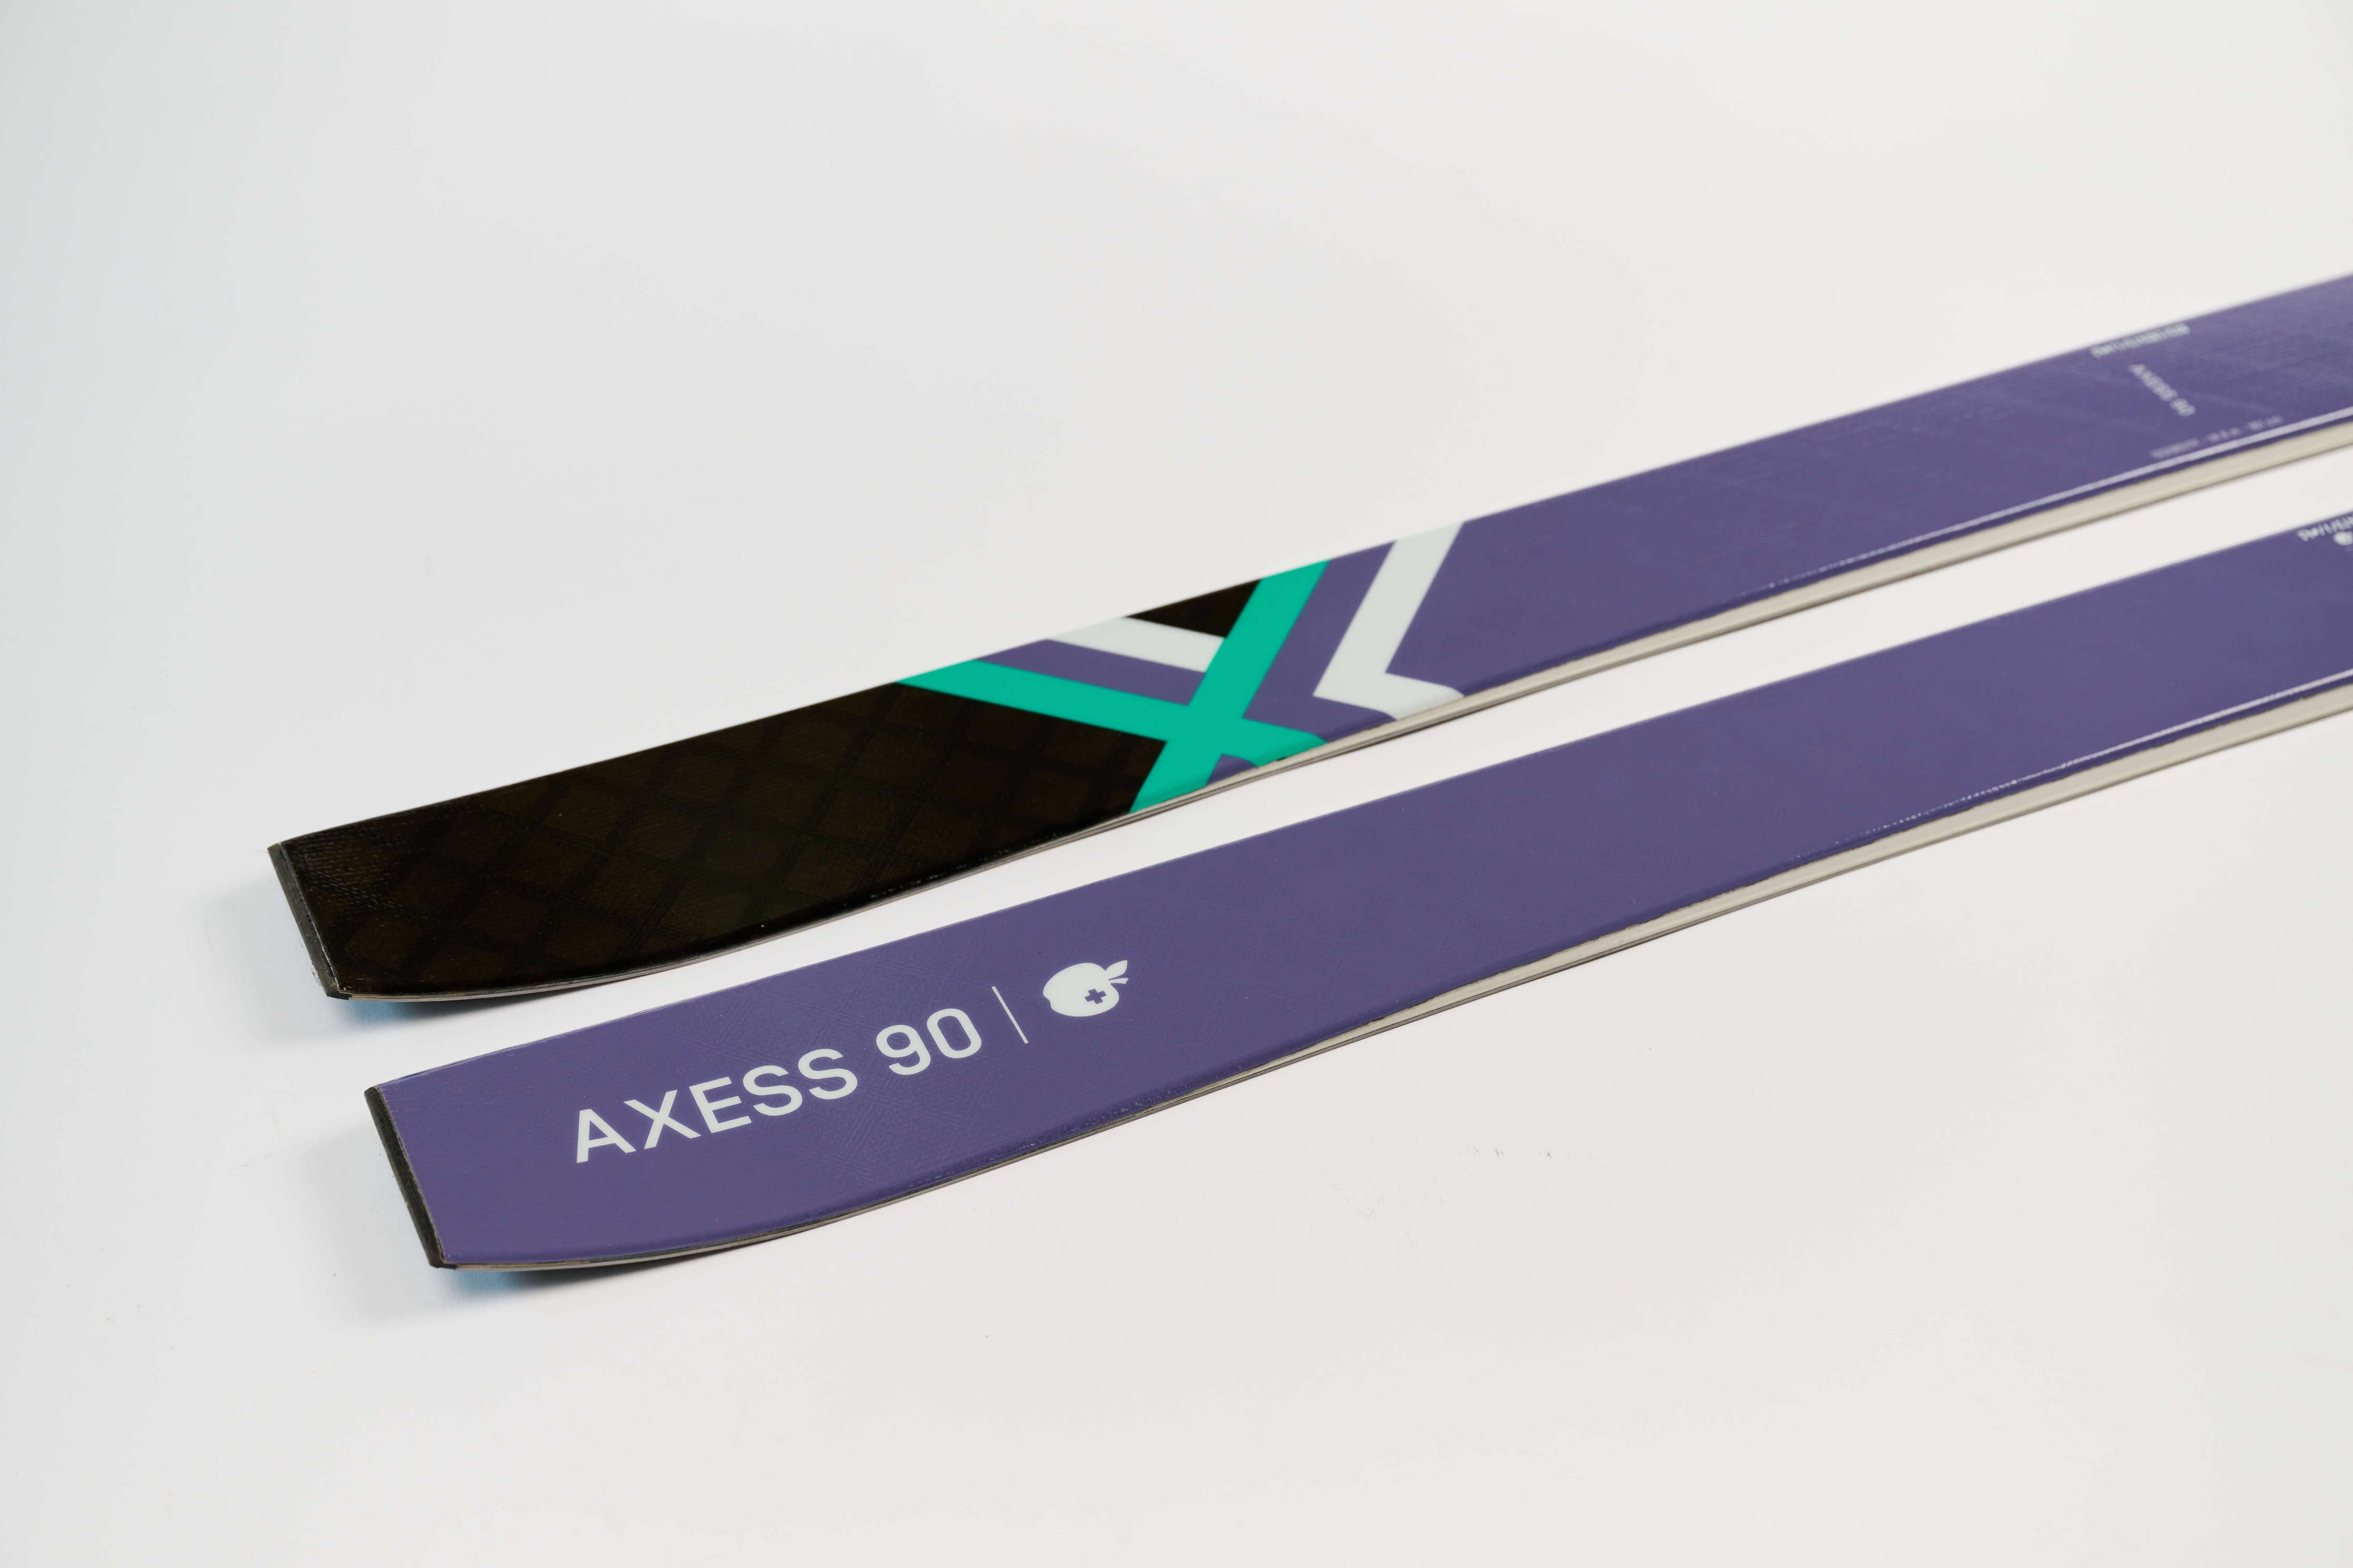 Unleash your potential with Movement's high-performance Axess 90 Women's skis.